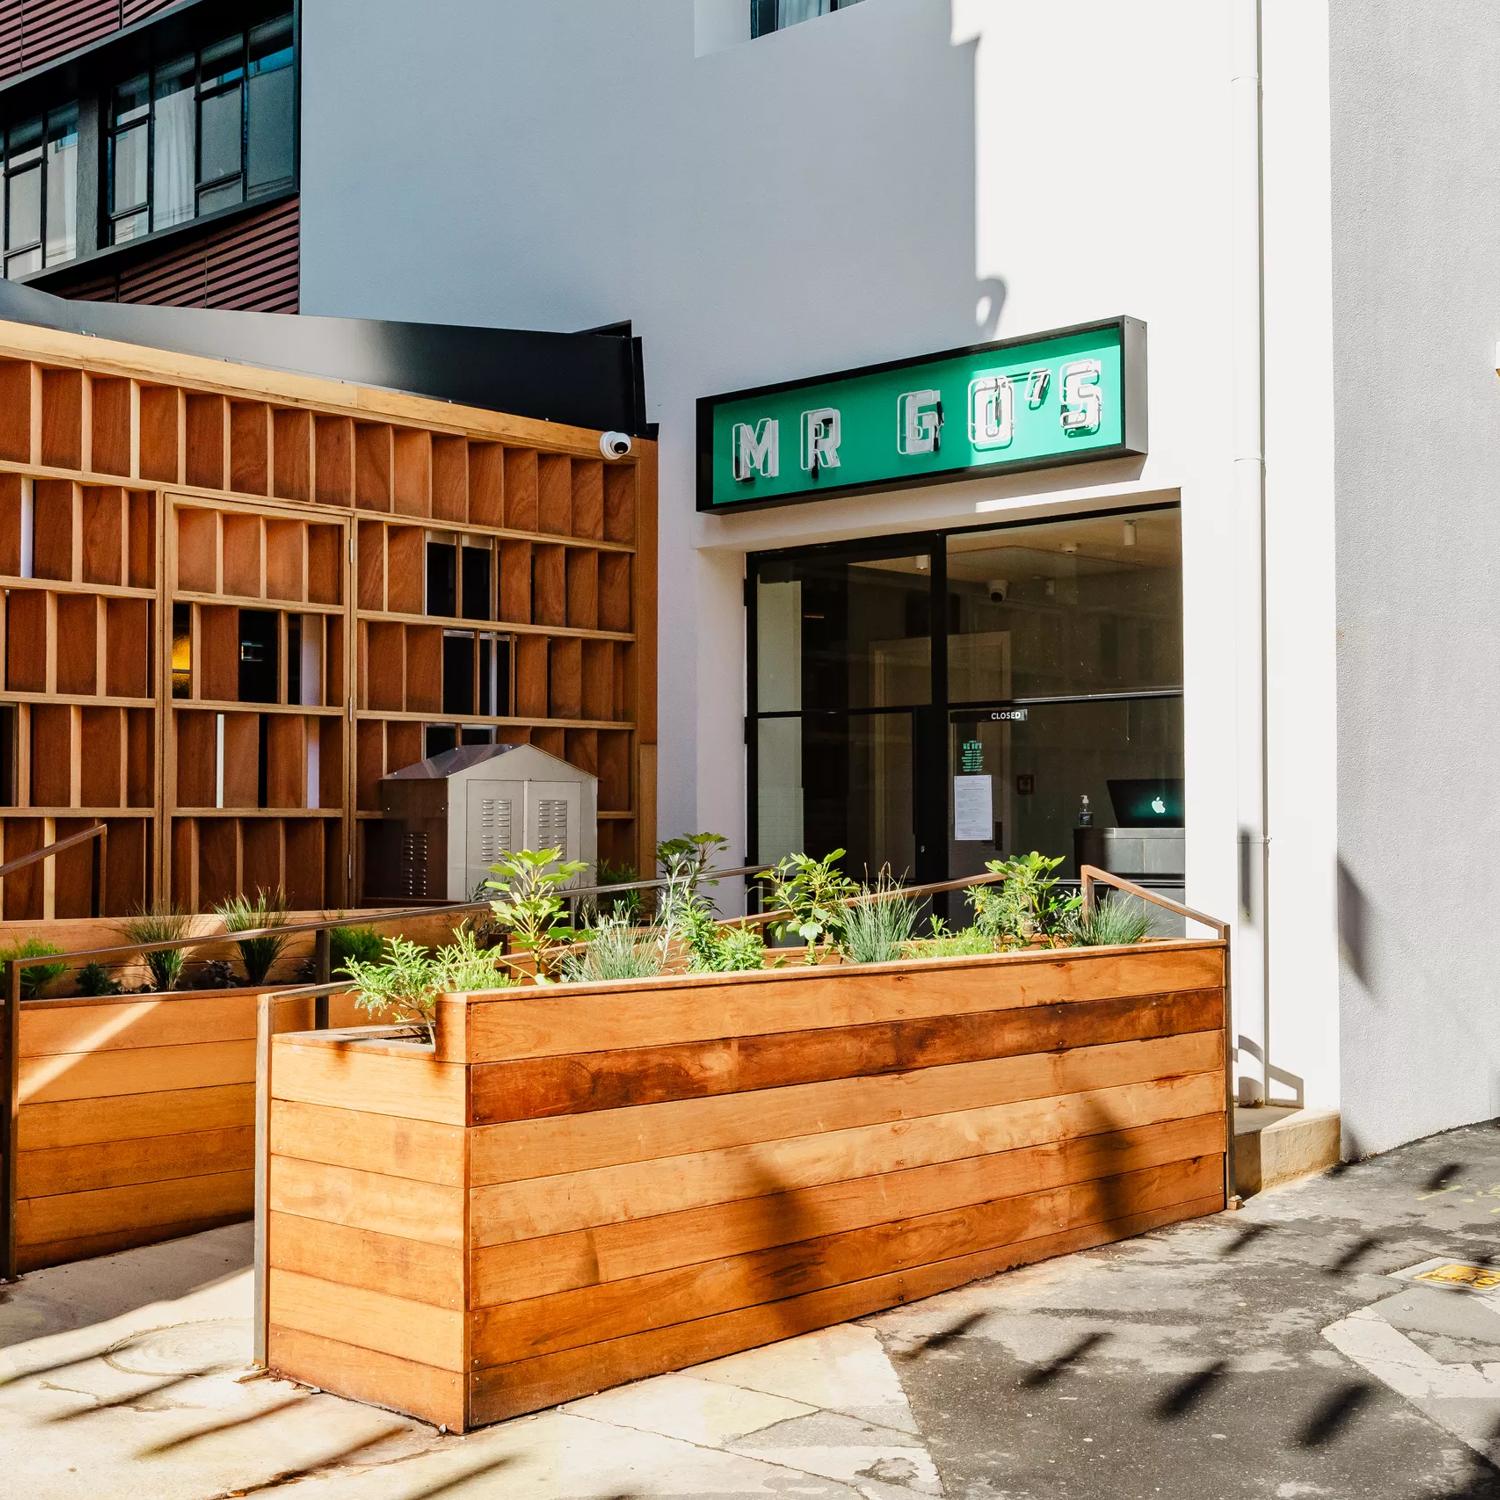 Entrance of Mr Go's restaurant with a green sign, glass doors, white walls and wooden planters leading up to the door. 